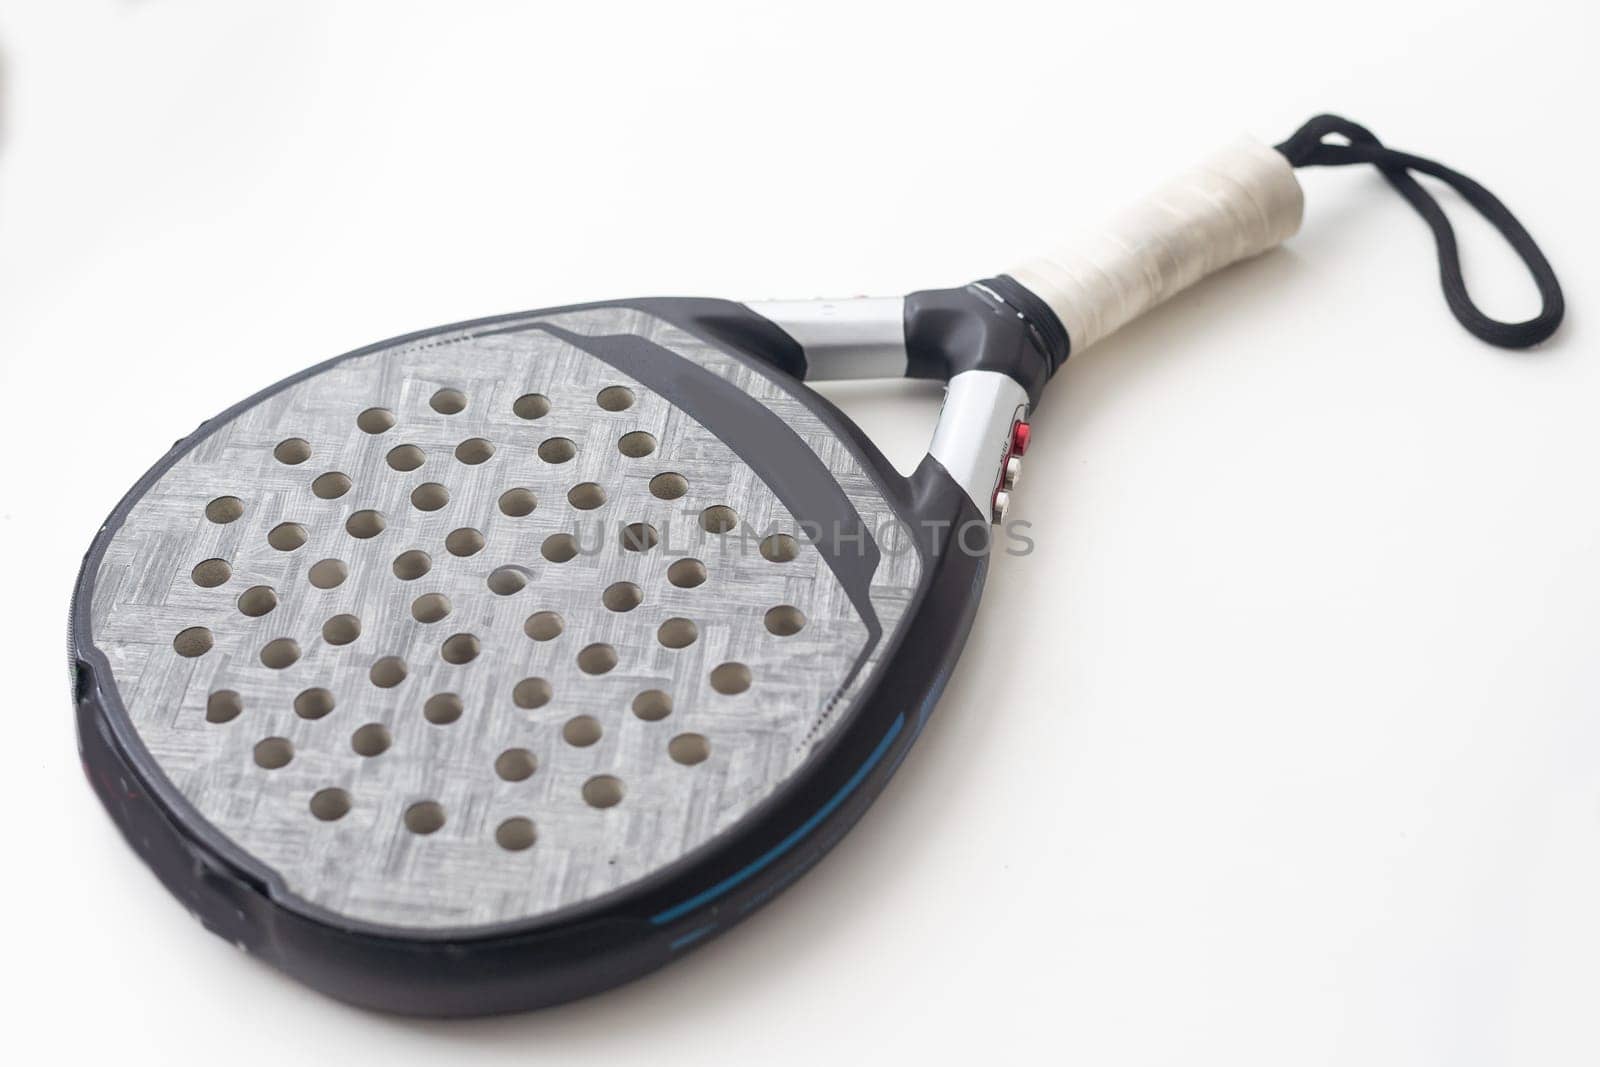 blue professional paddle tennis racket isolated on white background. portrait sport theme poster, greeting cards, headers, website and app by Andelov13